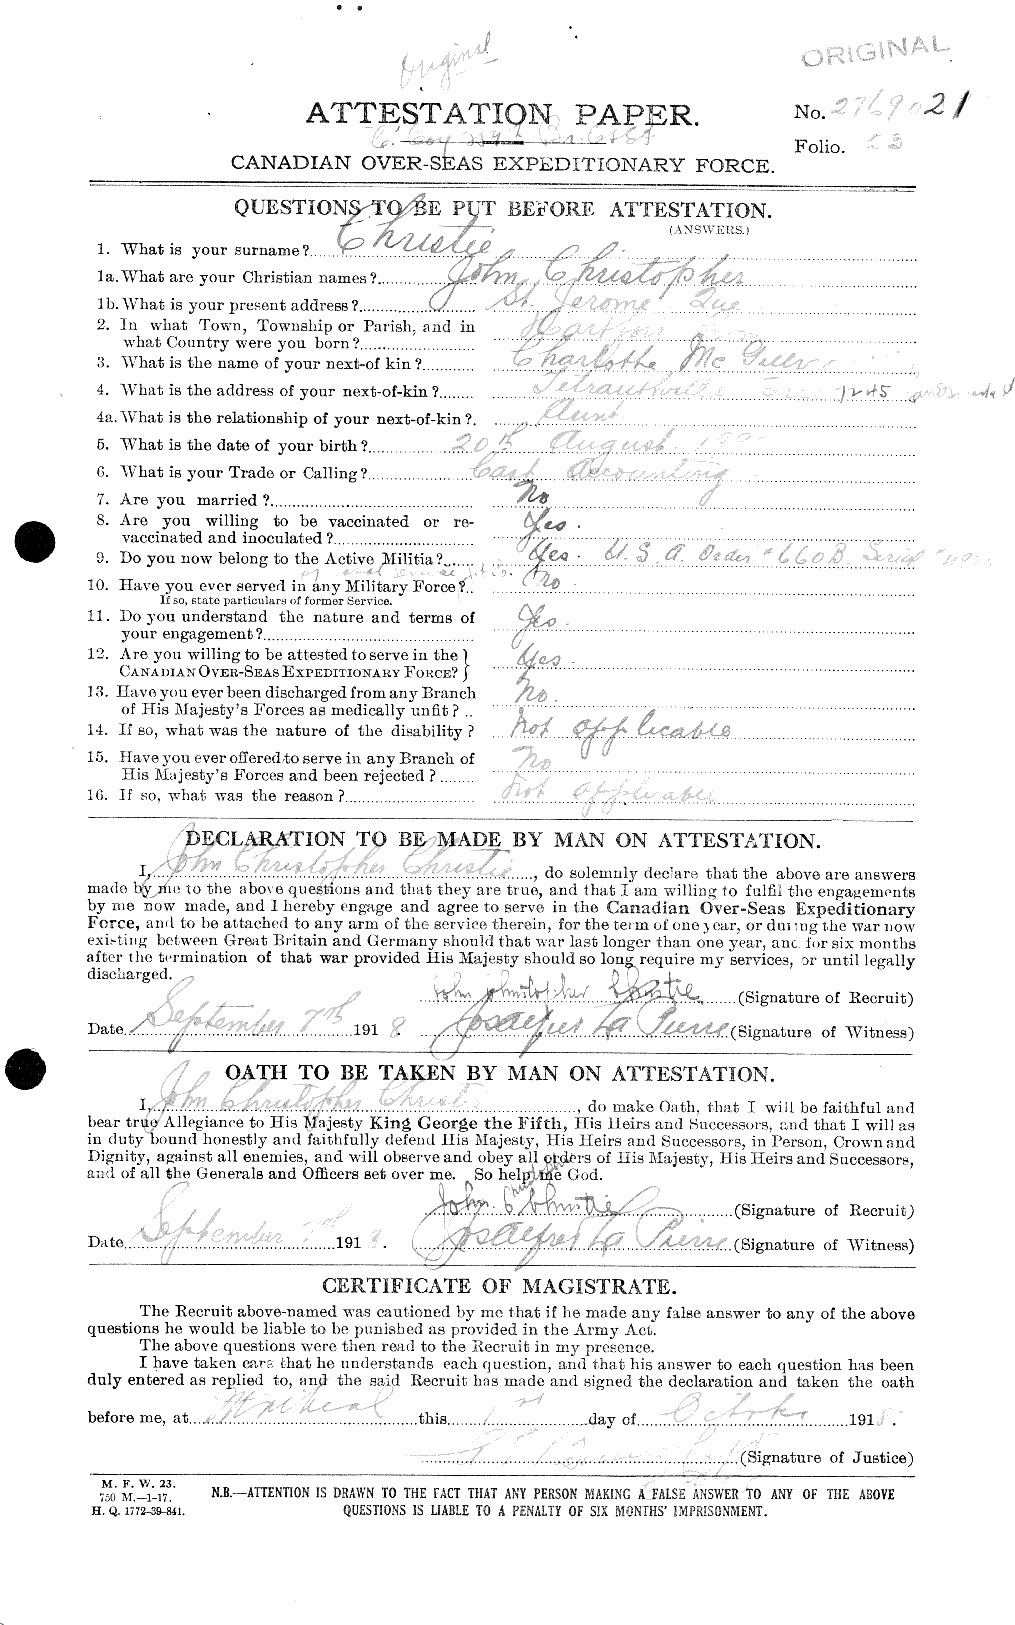 Personnel Records of the First World War - CEF 021998a